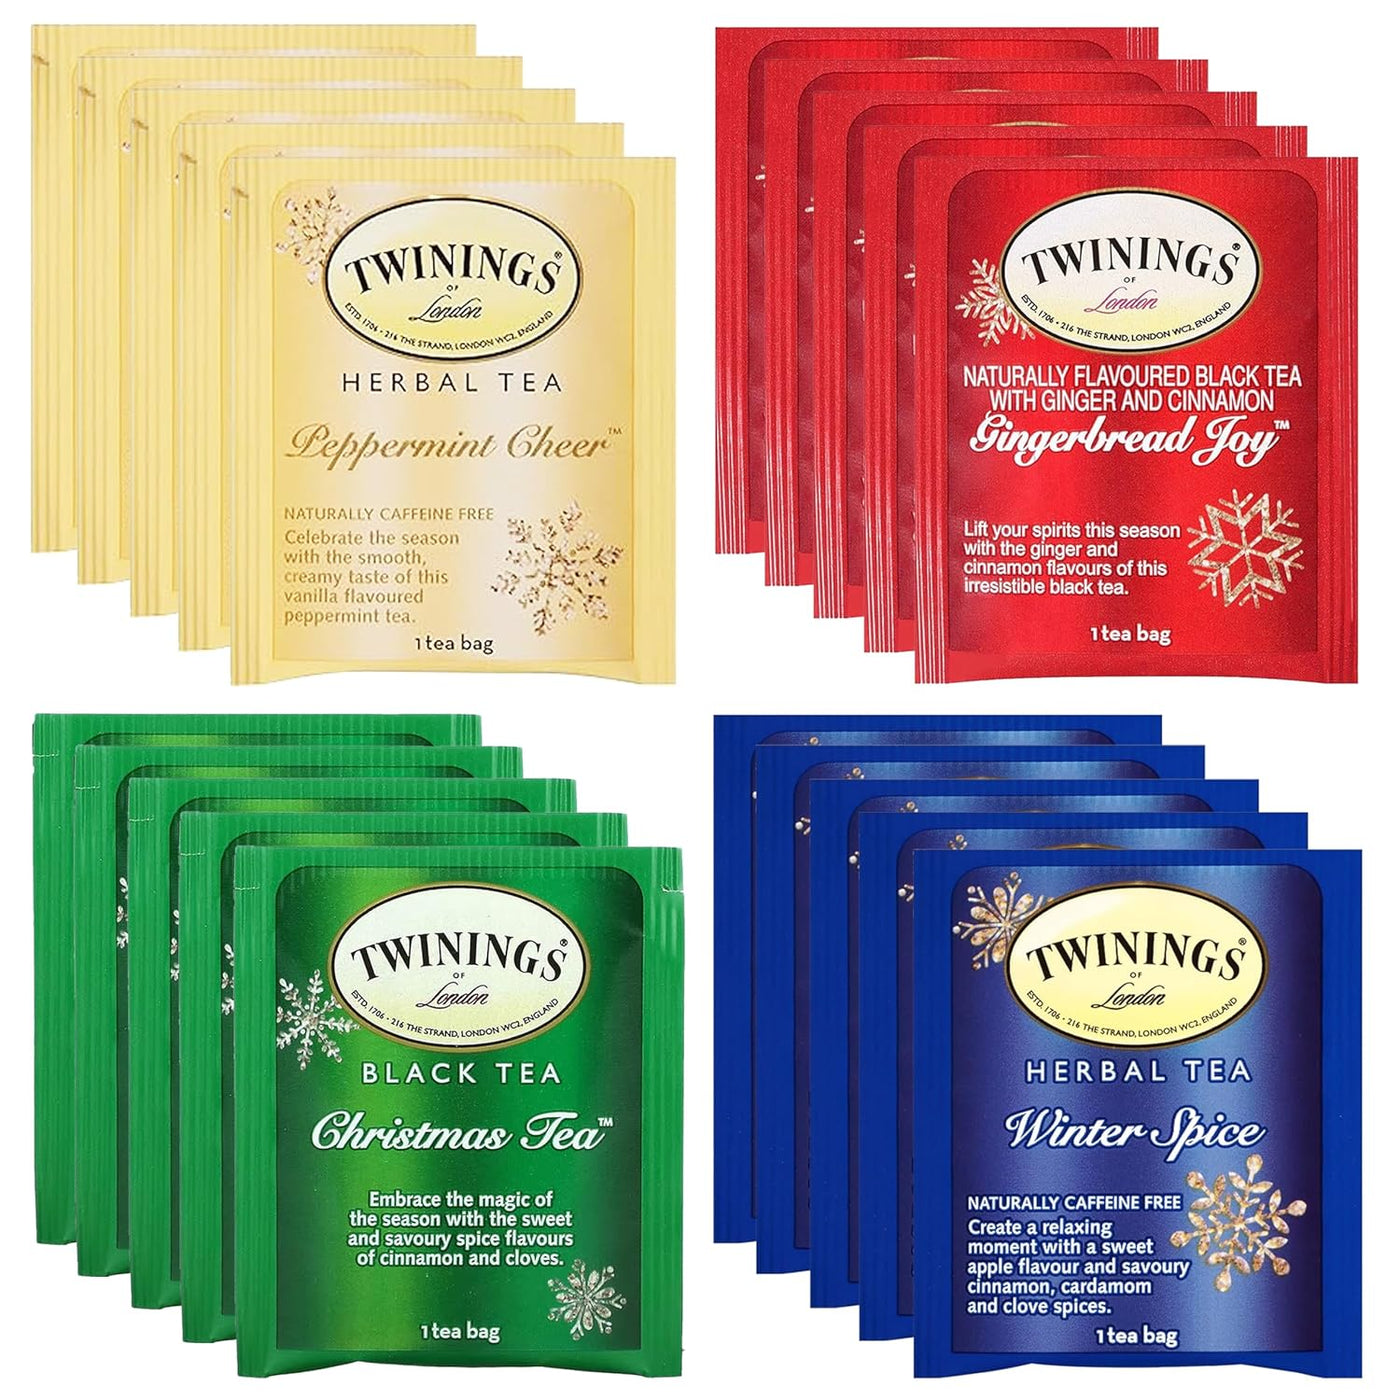 Twinings Tea Bags Sampler Assortment Gift Box 20 Count 4 Flavors with Convenient Gift Box Seasonal Collection Awesome Gifts for College Students Friends